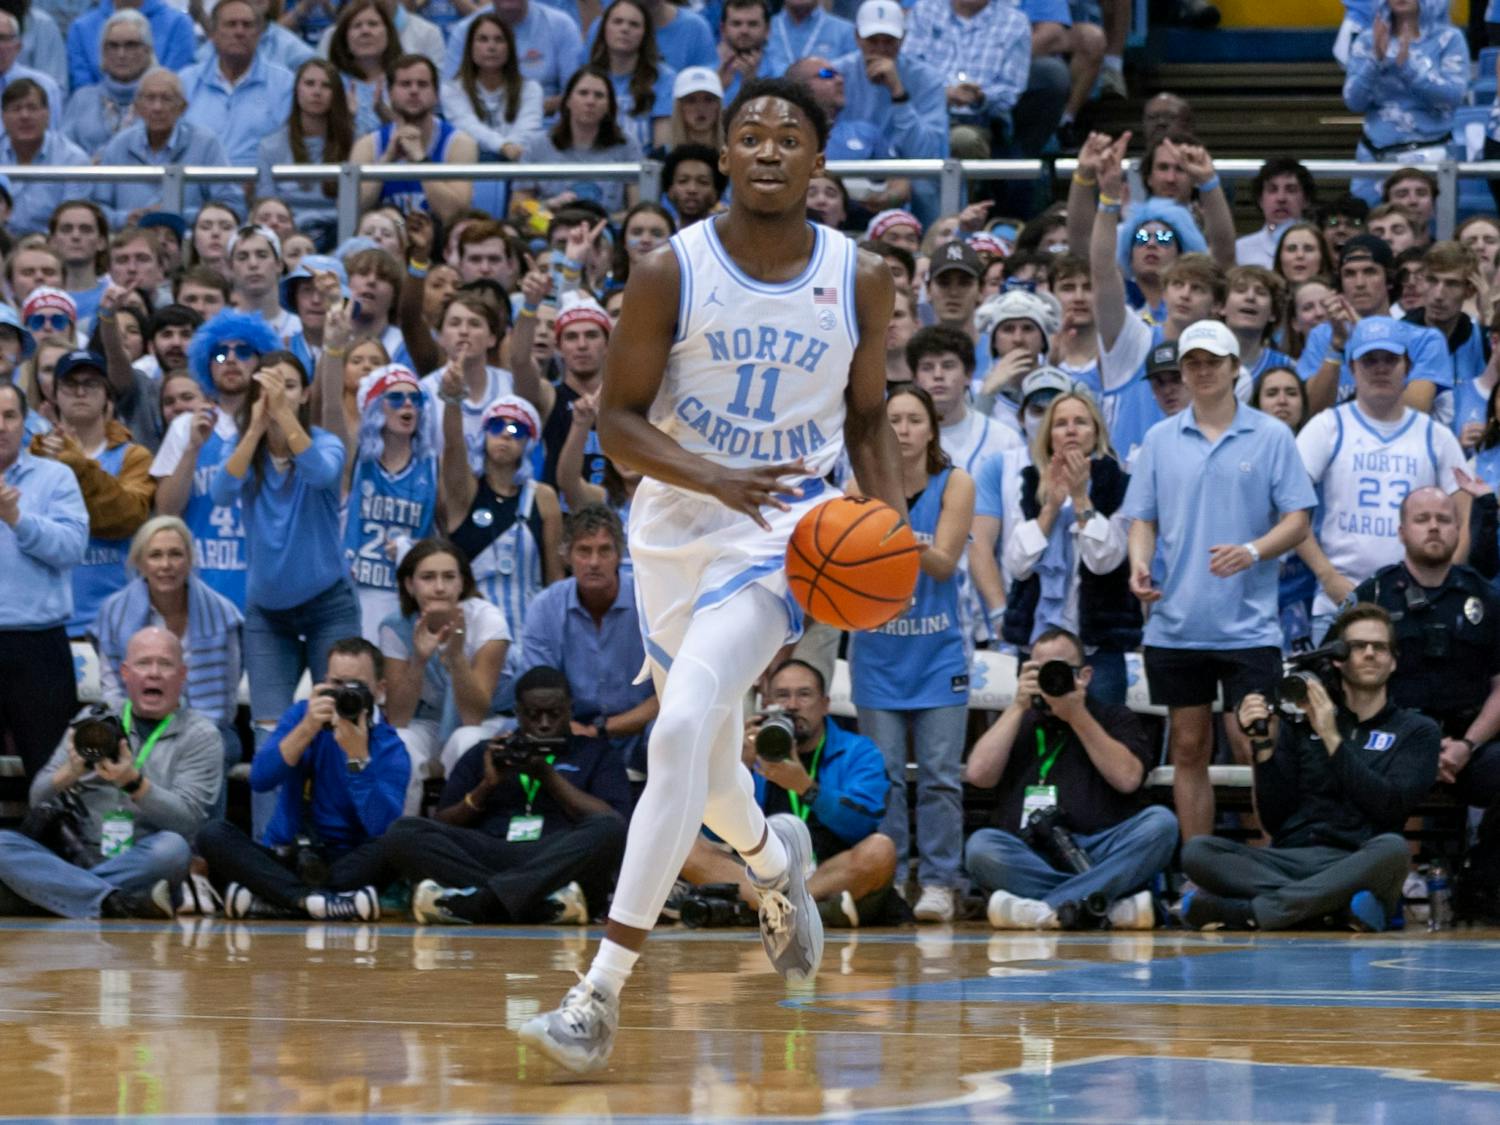 UNC sophomore guard D'Marco Dunn (11) dribbles the ball during the men's basketball game against Duke at the Dean E. Smith Center on Saturday, March 4, 2023. UNC fell to Duke 62-57.